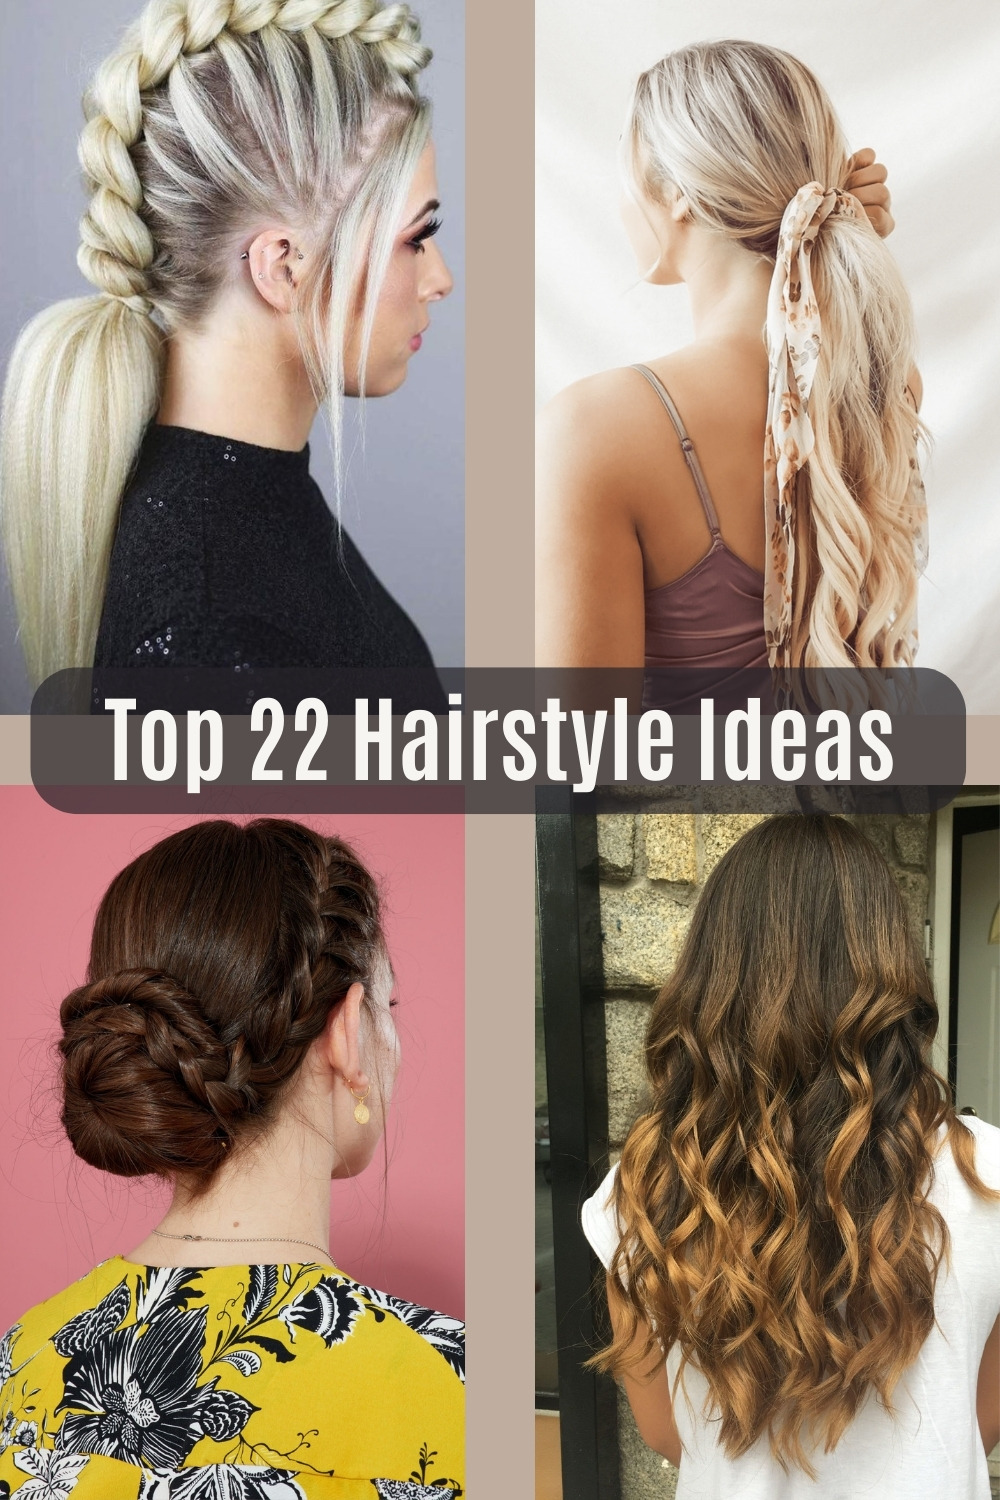 Hairstyle ideas for Long hair